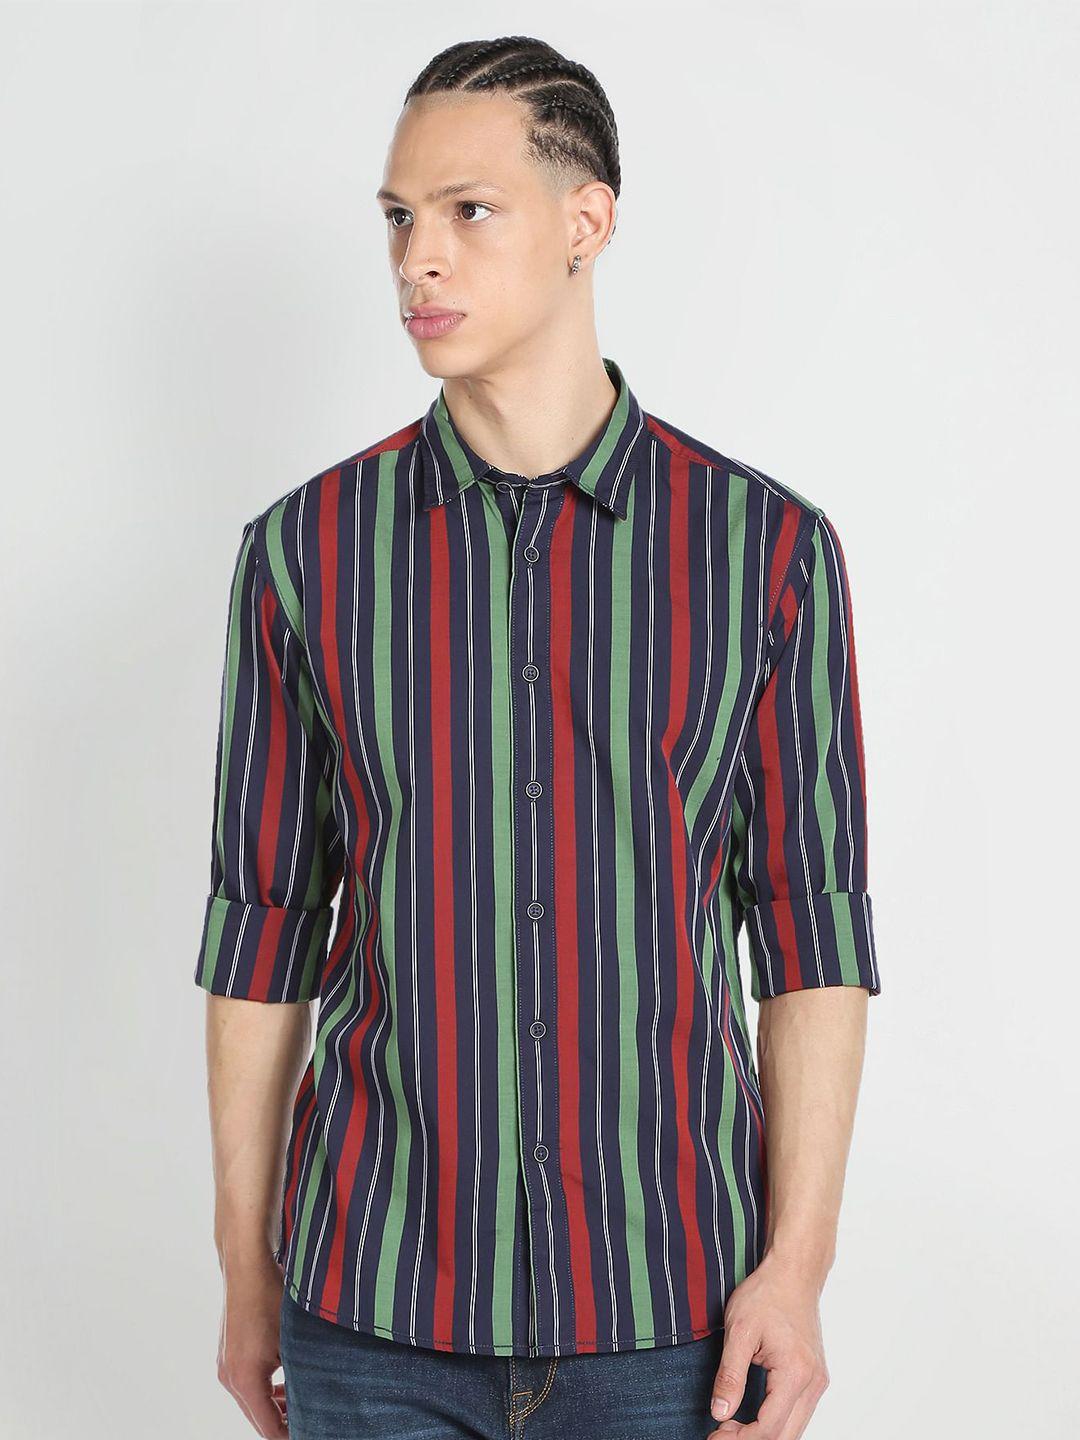 flying-machine-slim-fit-vertical-striped-pure-cotton-casual-shirt